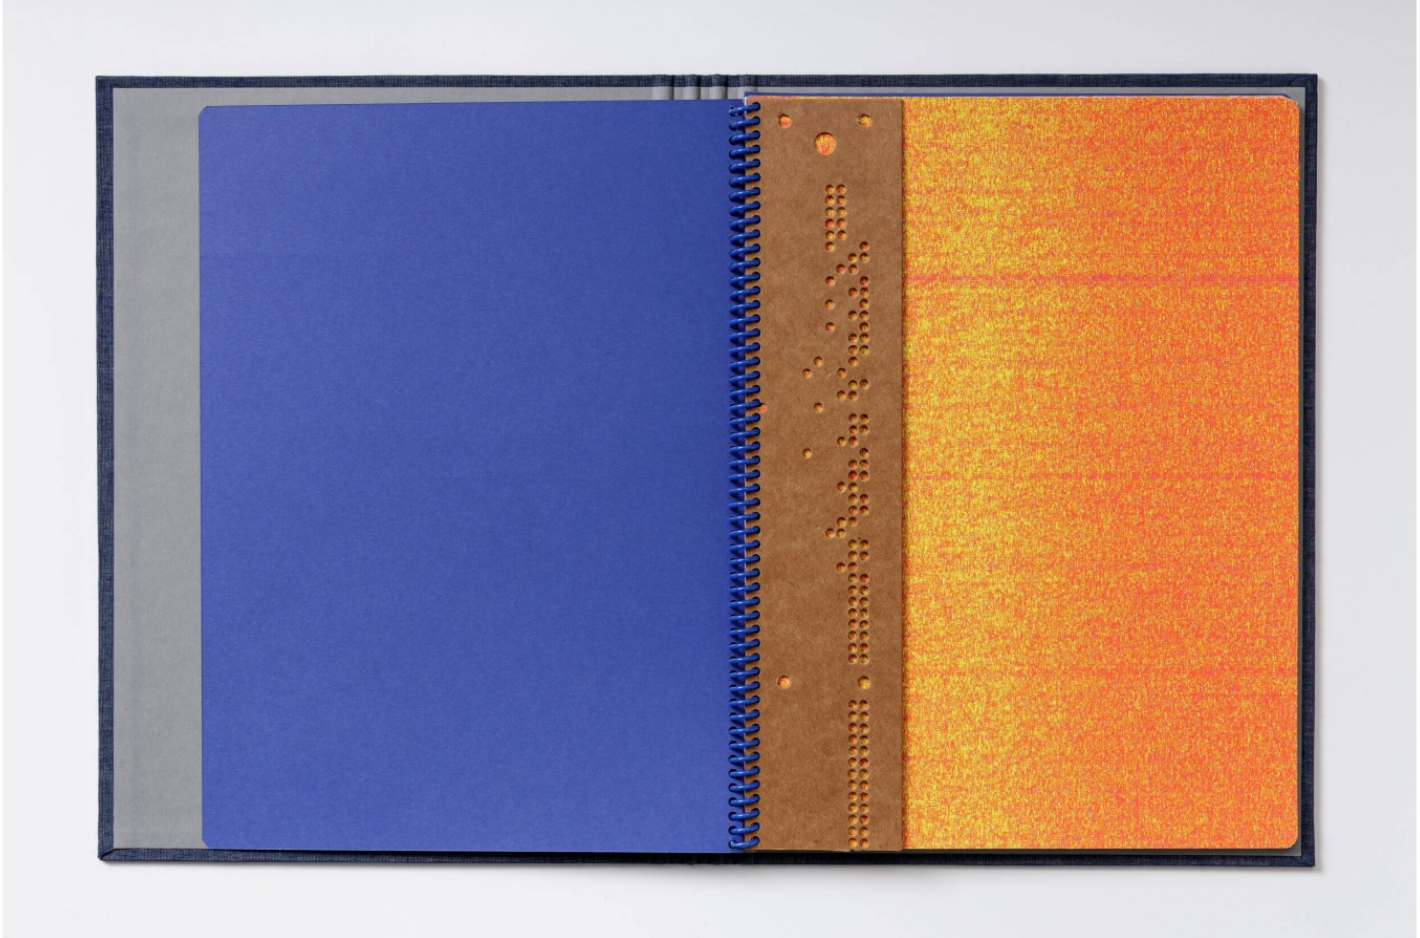 A book with a blue page on the left and an orange page on the right with perforated circles.